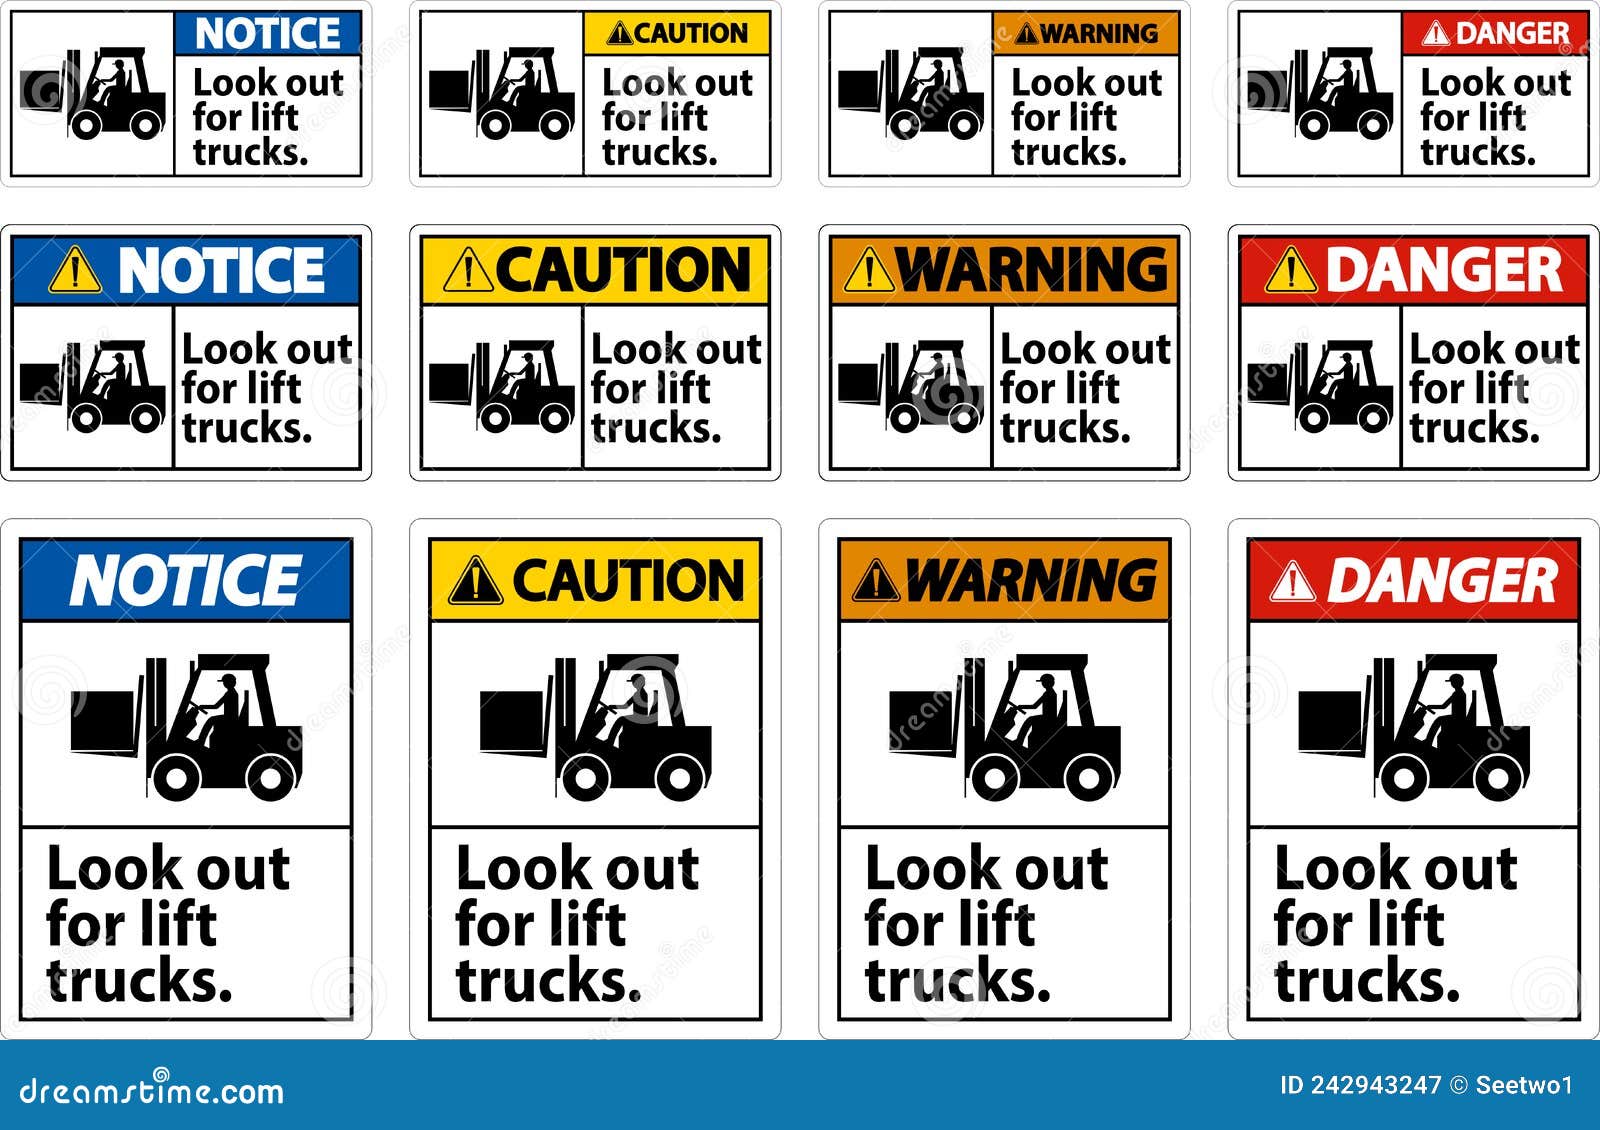 Danger Look Out for Lift Trucks Sign on White Background Stock Vector ...